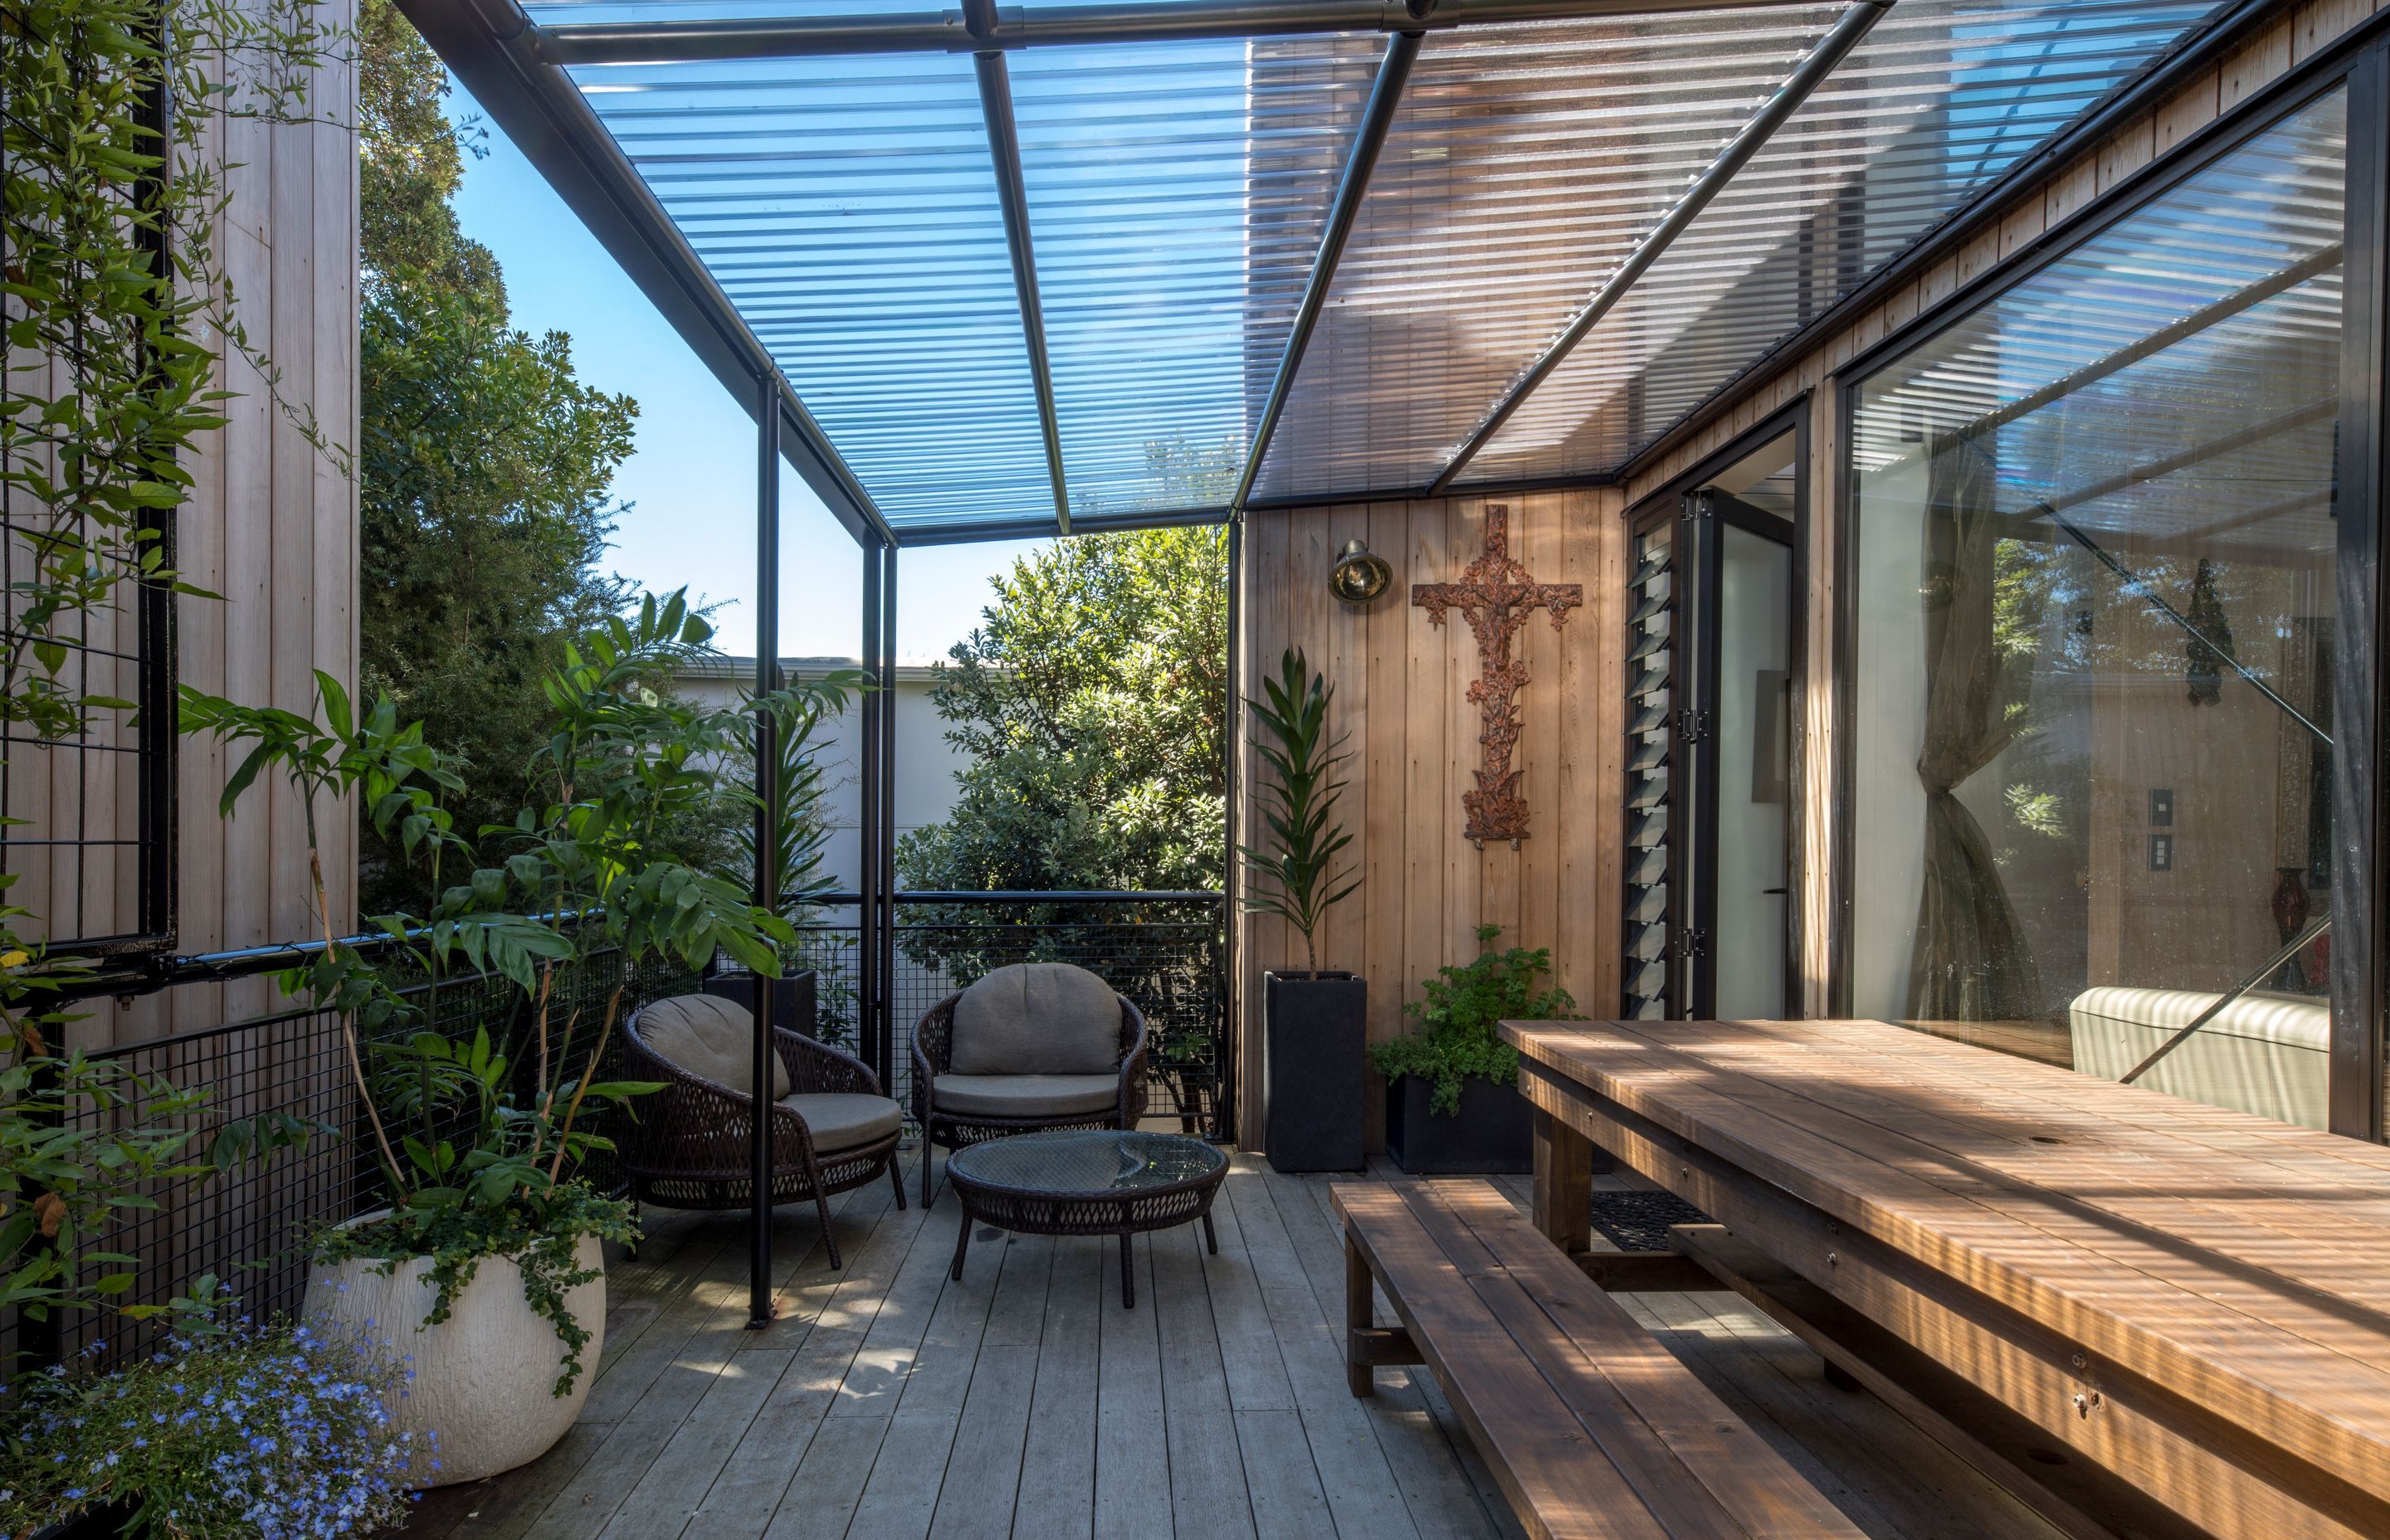 An outdoor shelter can be a wonderful extension to the internal living space.